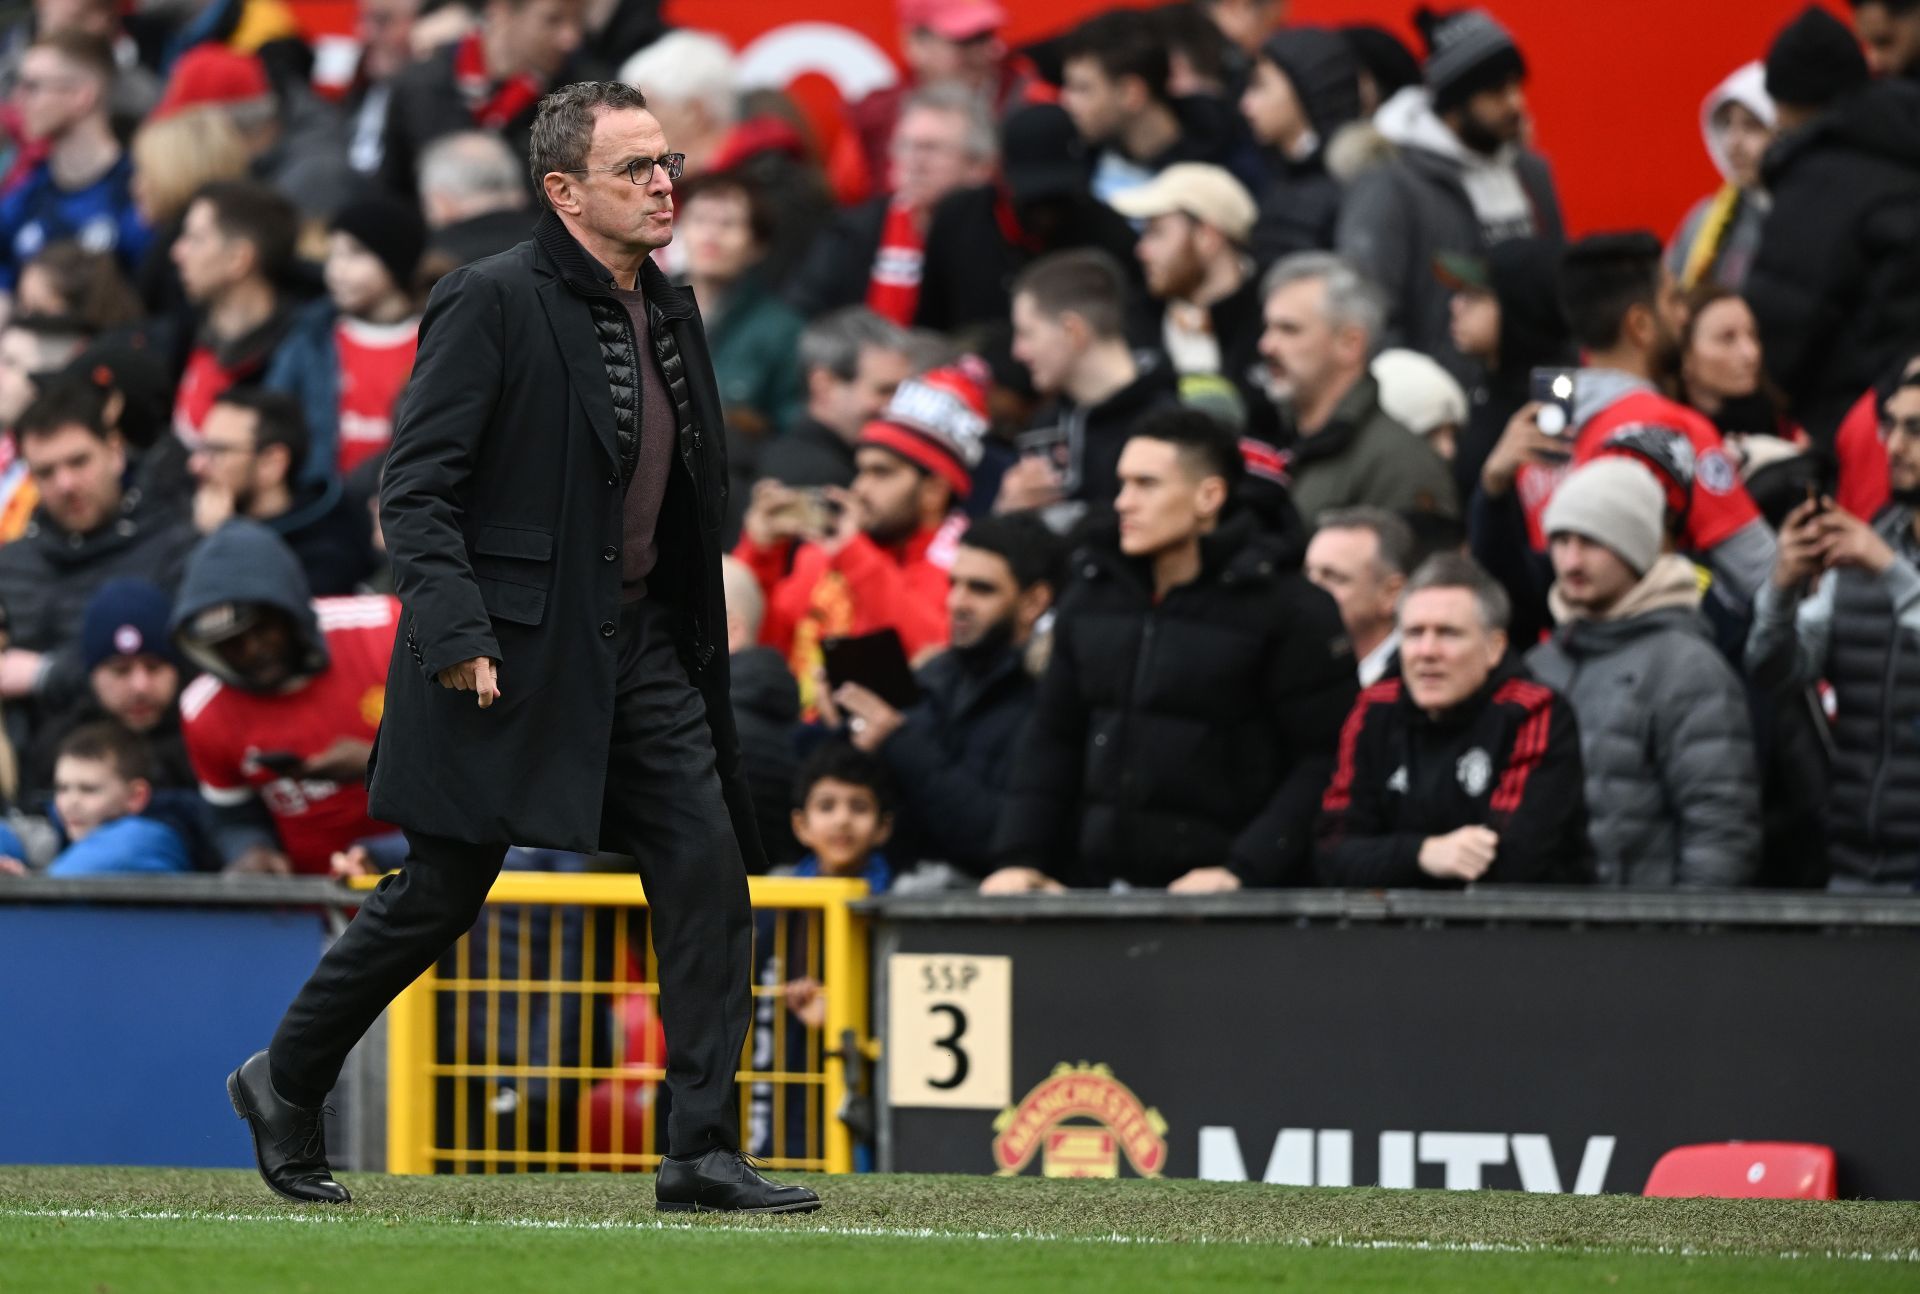 Ralf Rangnick is the interim manager of Manchester United currently